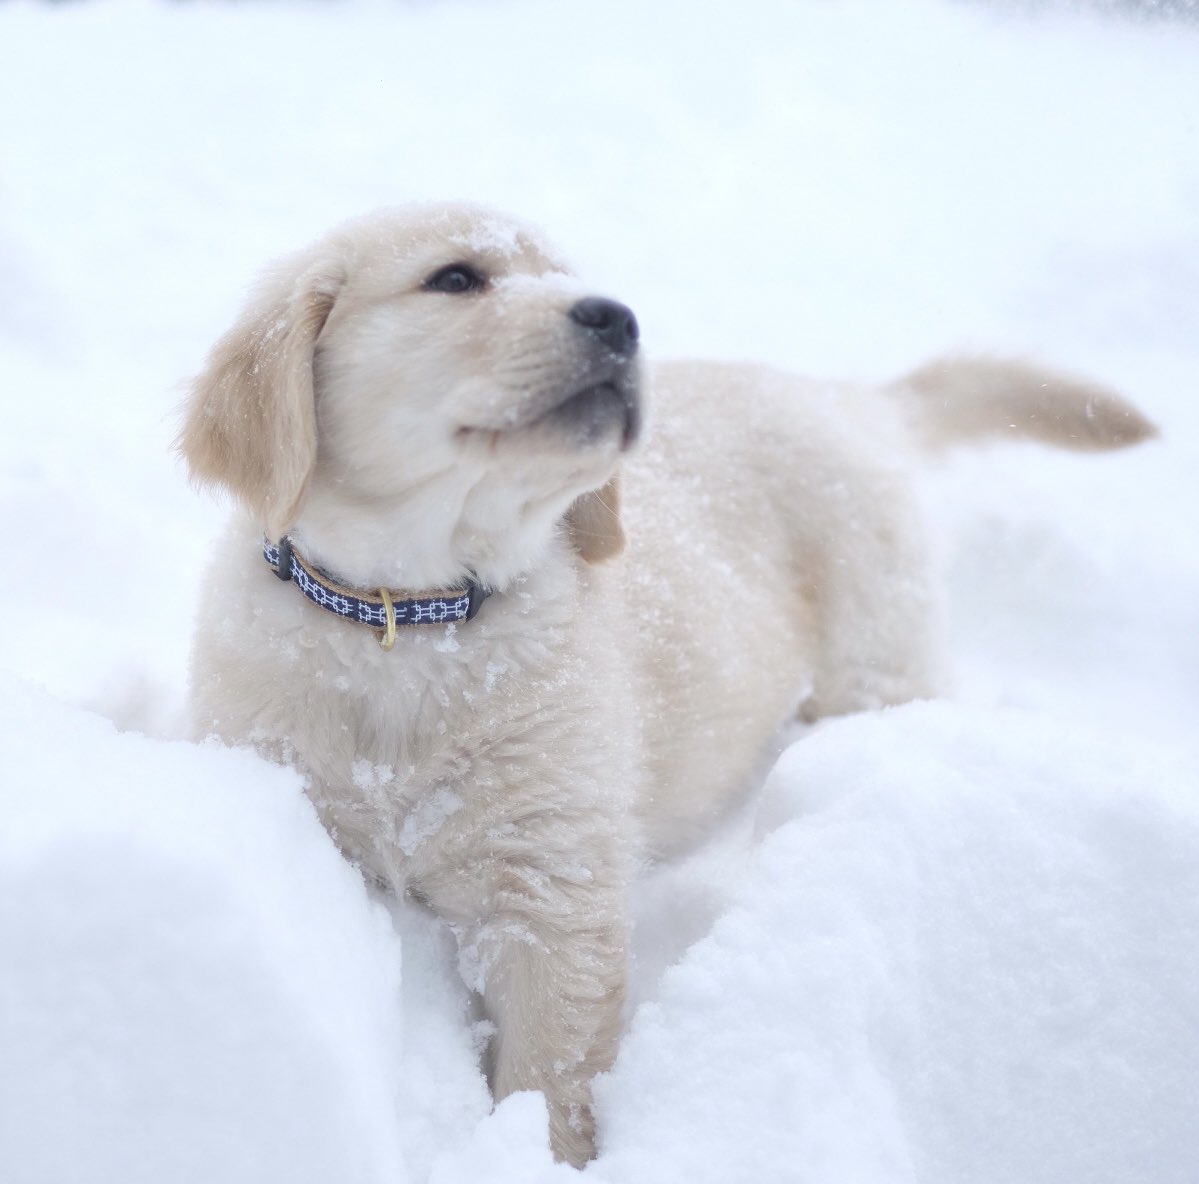 day 82 of jonny as puppies feat. snow jonny!!  in honor of my current weather